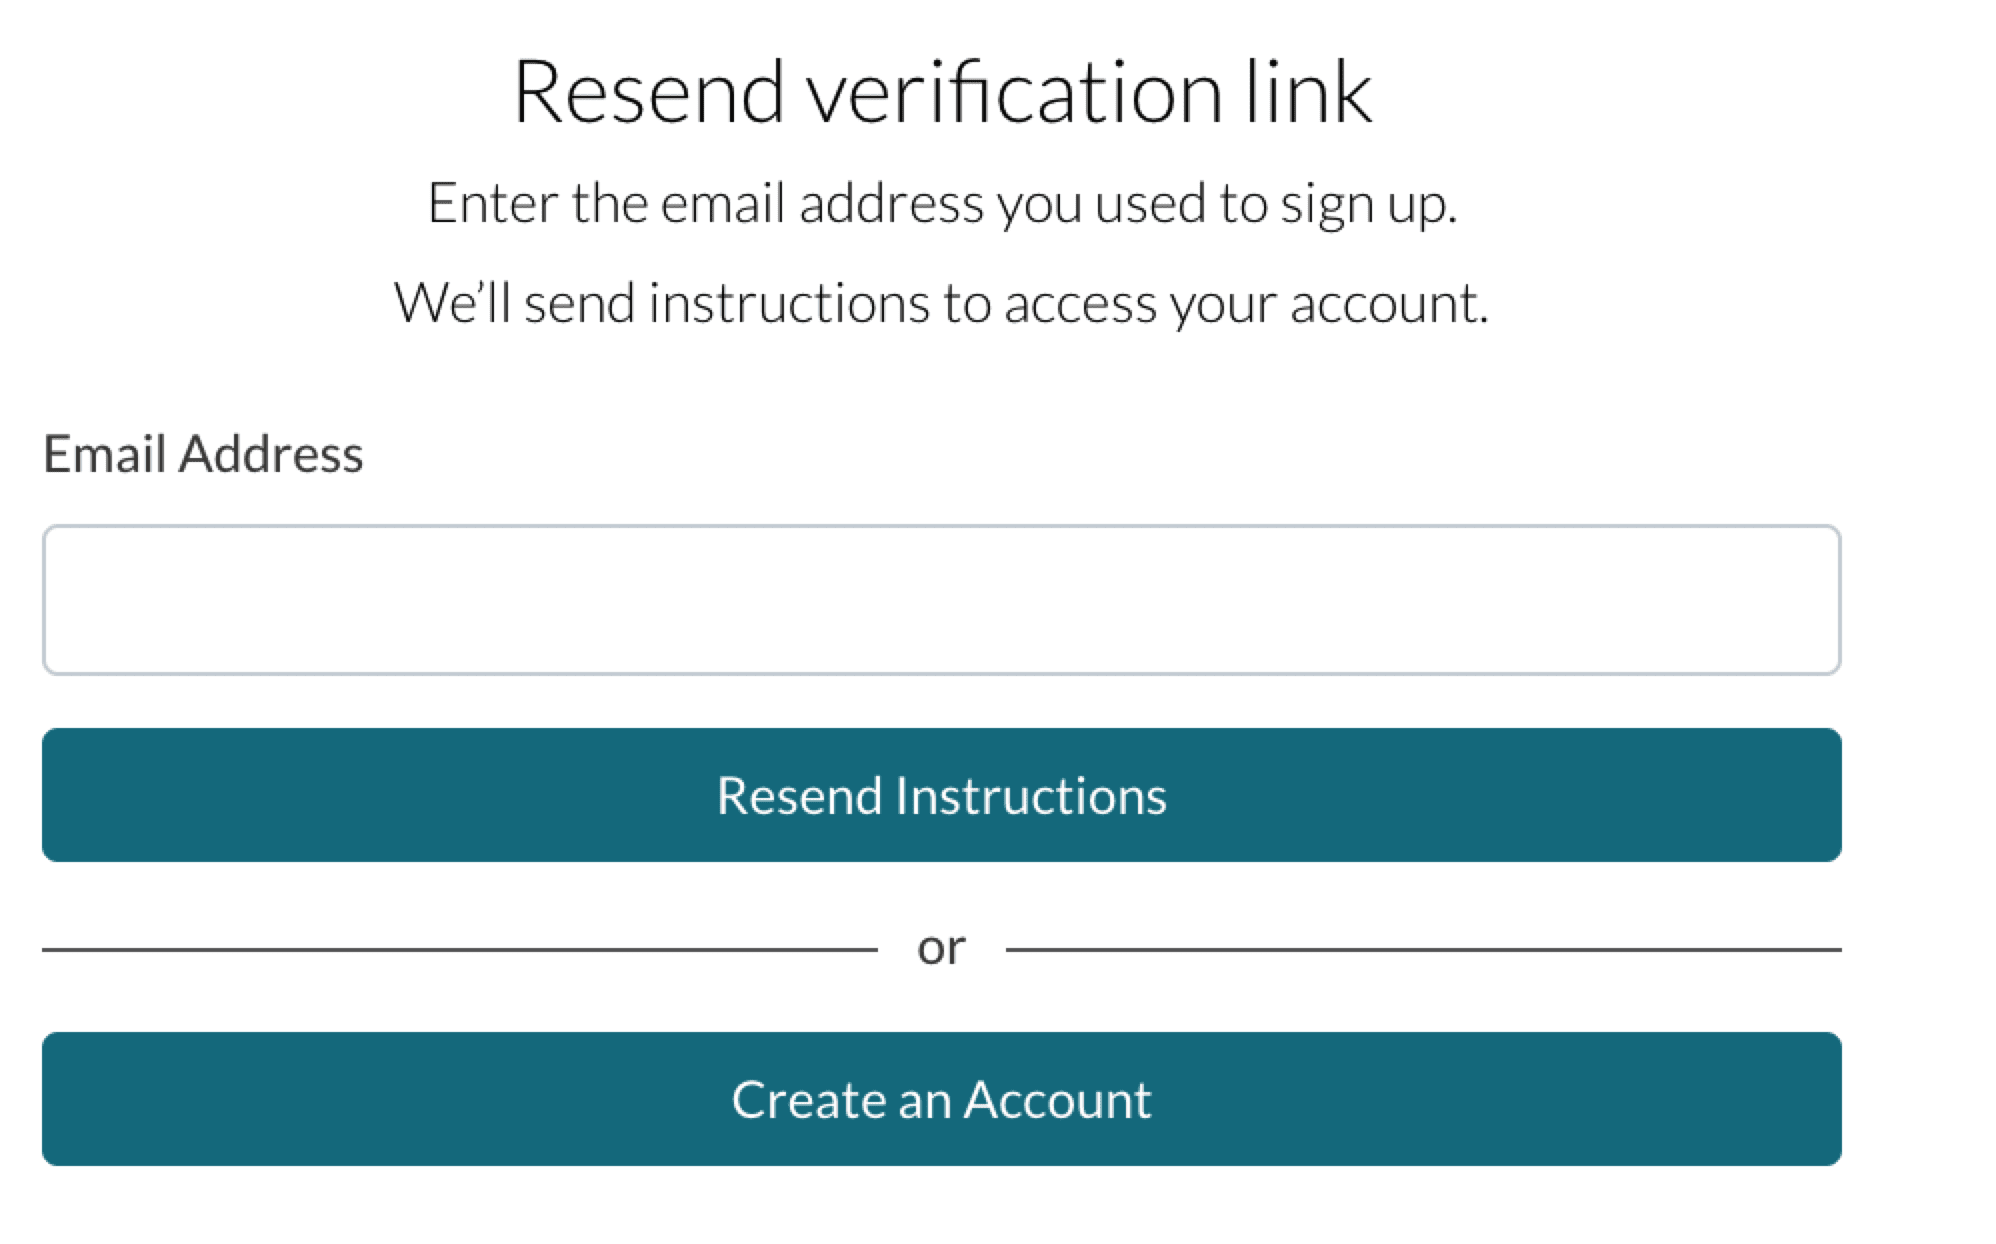 Resend verification link page